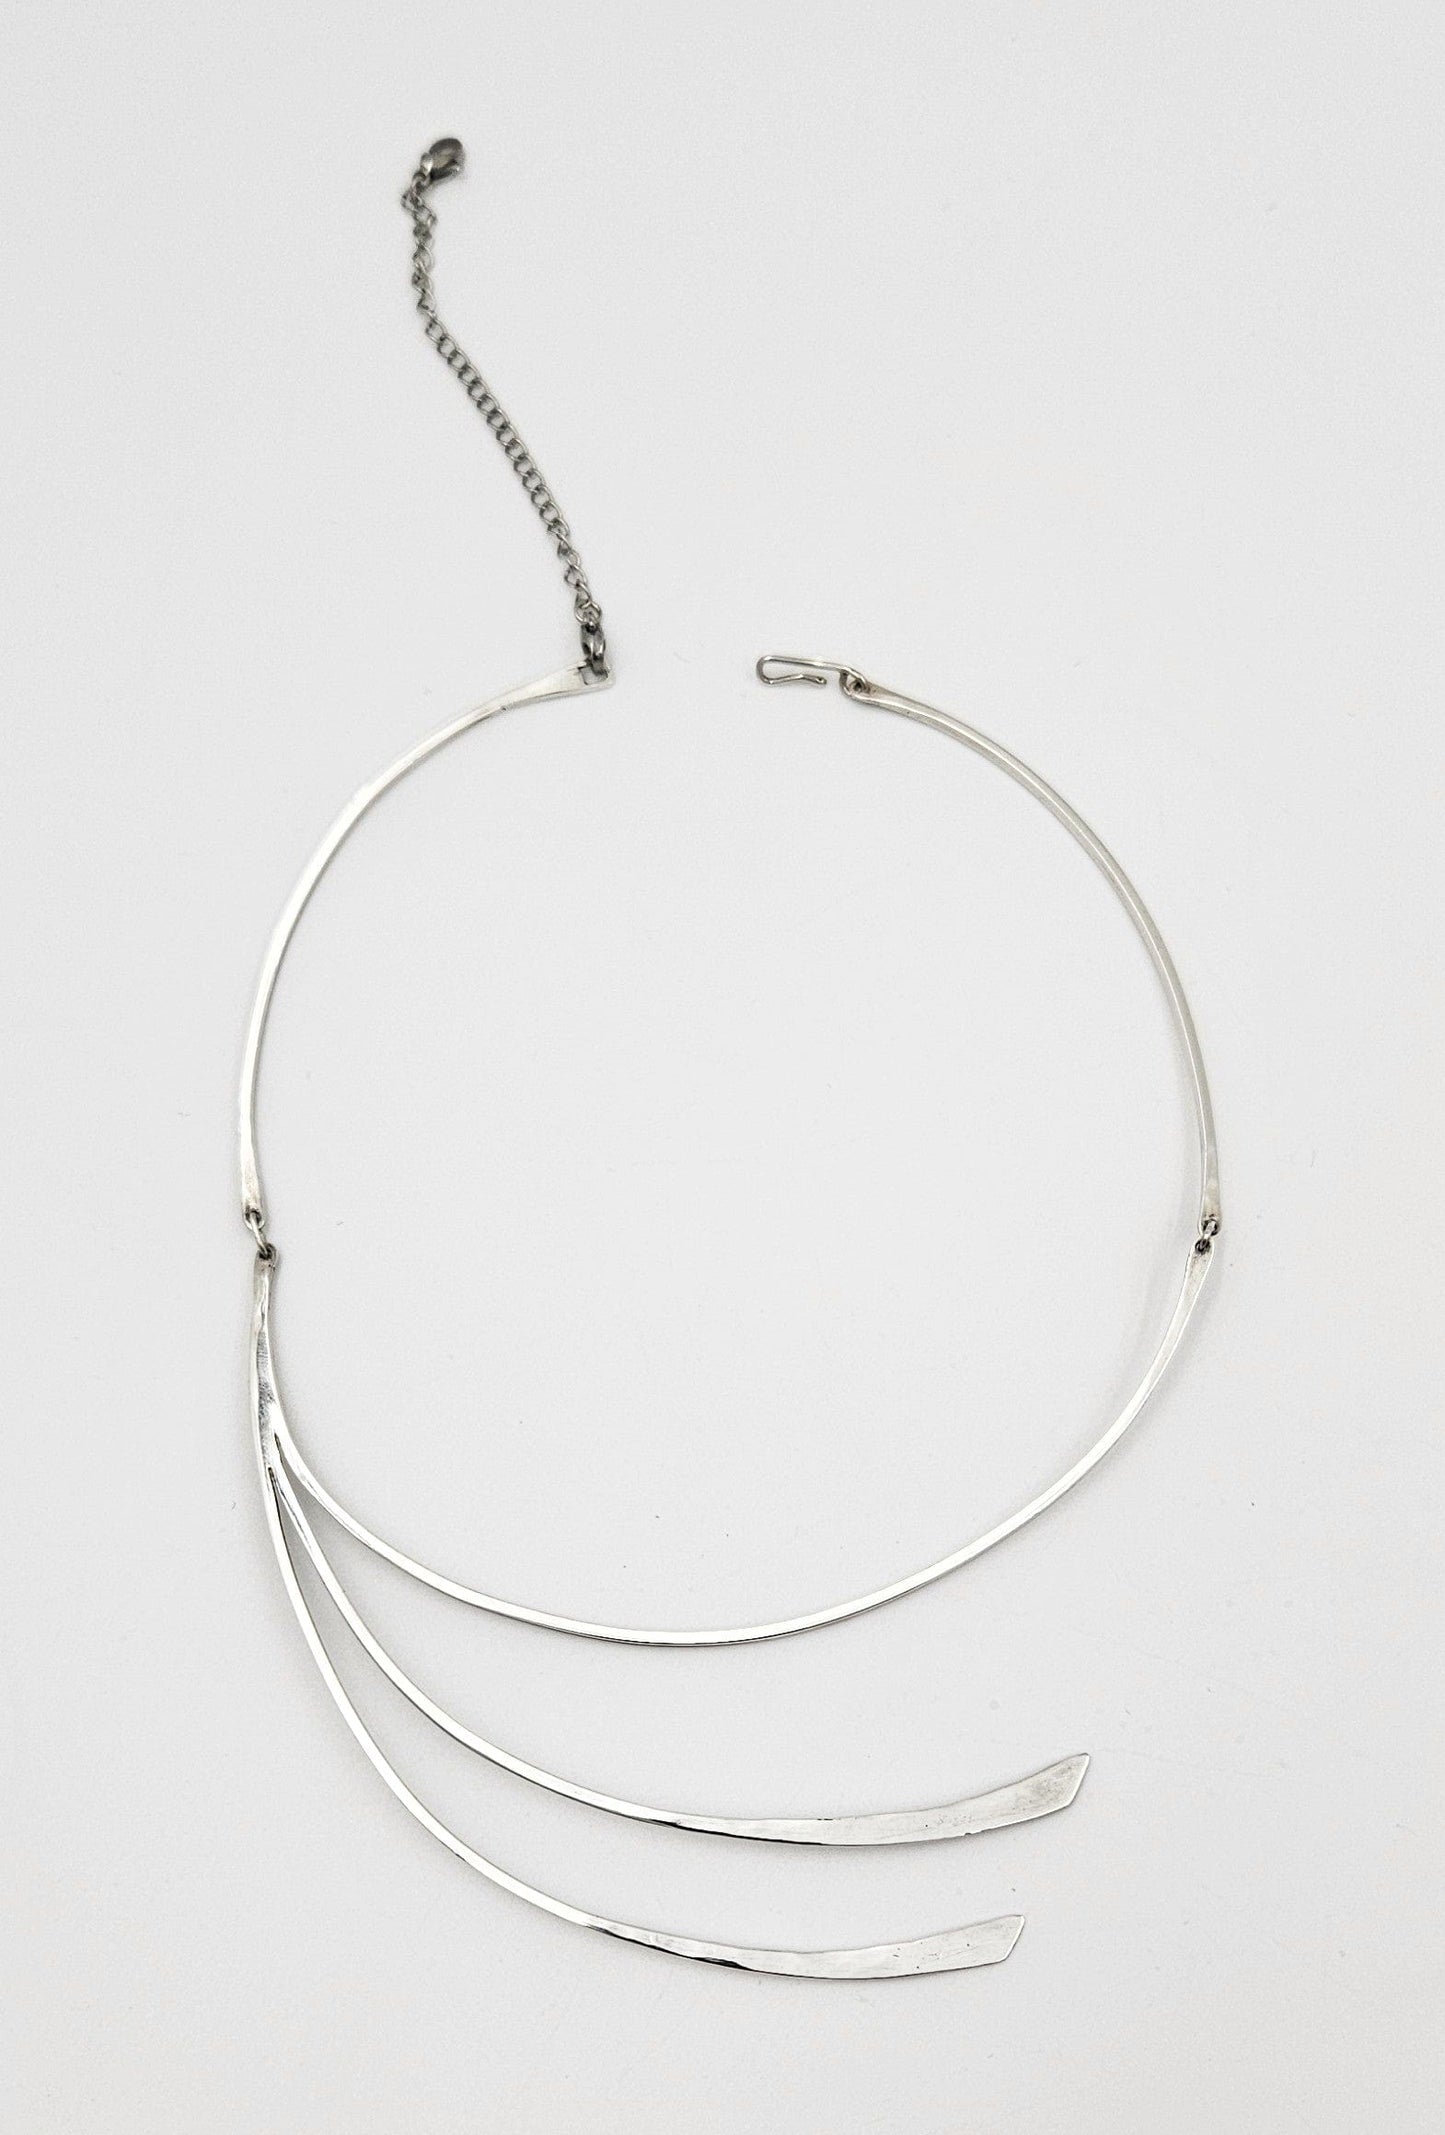 Betty Cooke Jewelry Superb US Designer Betty Cooke Modernist Sterling Silver Necklace Circa 1950's